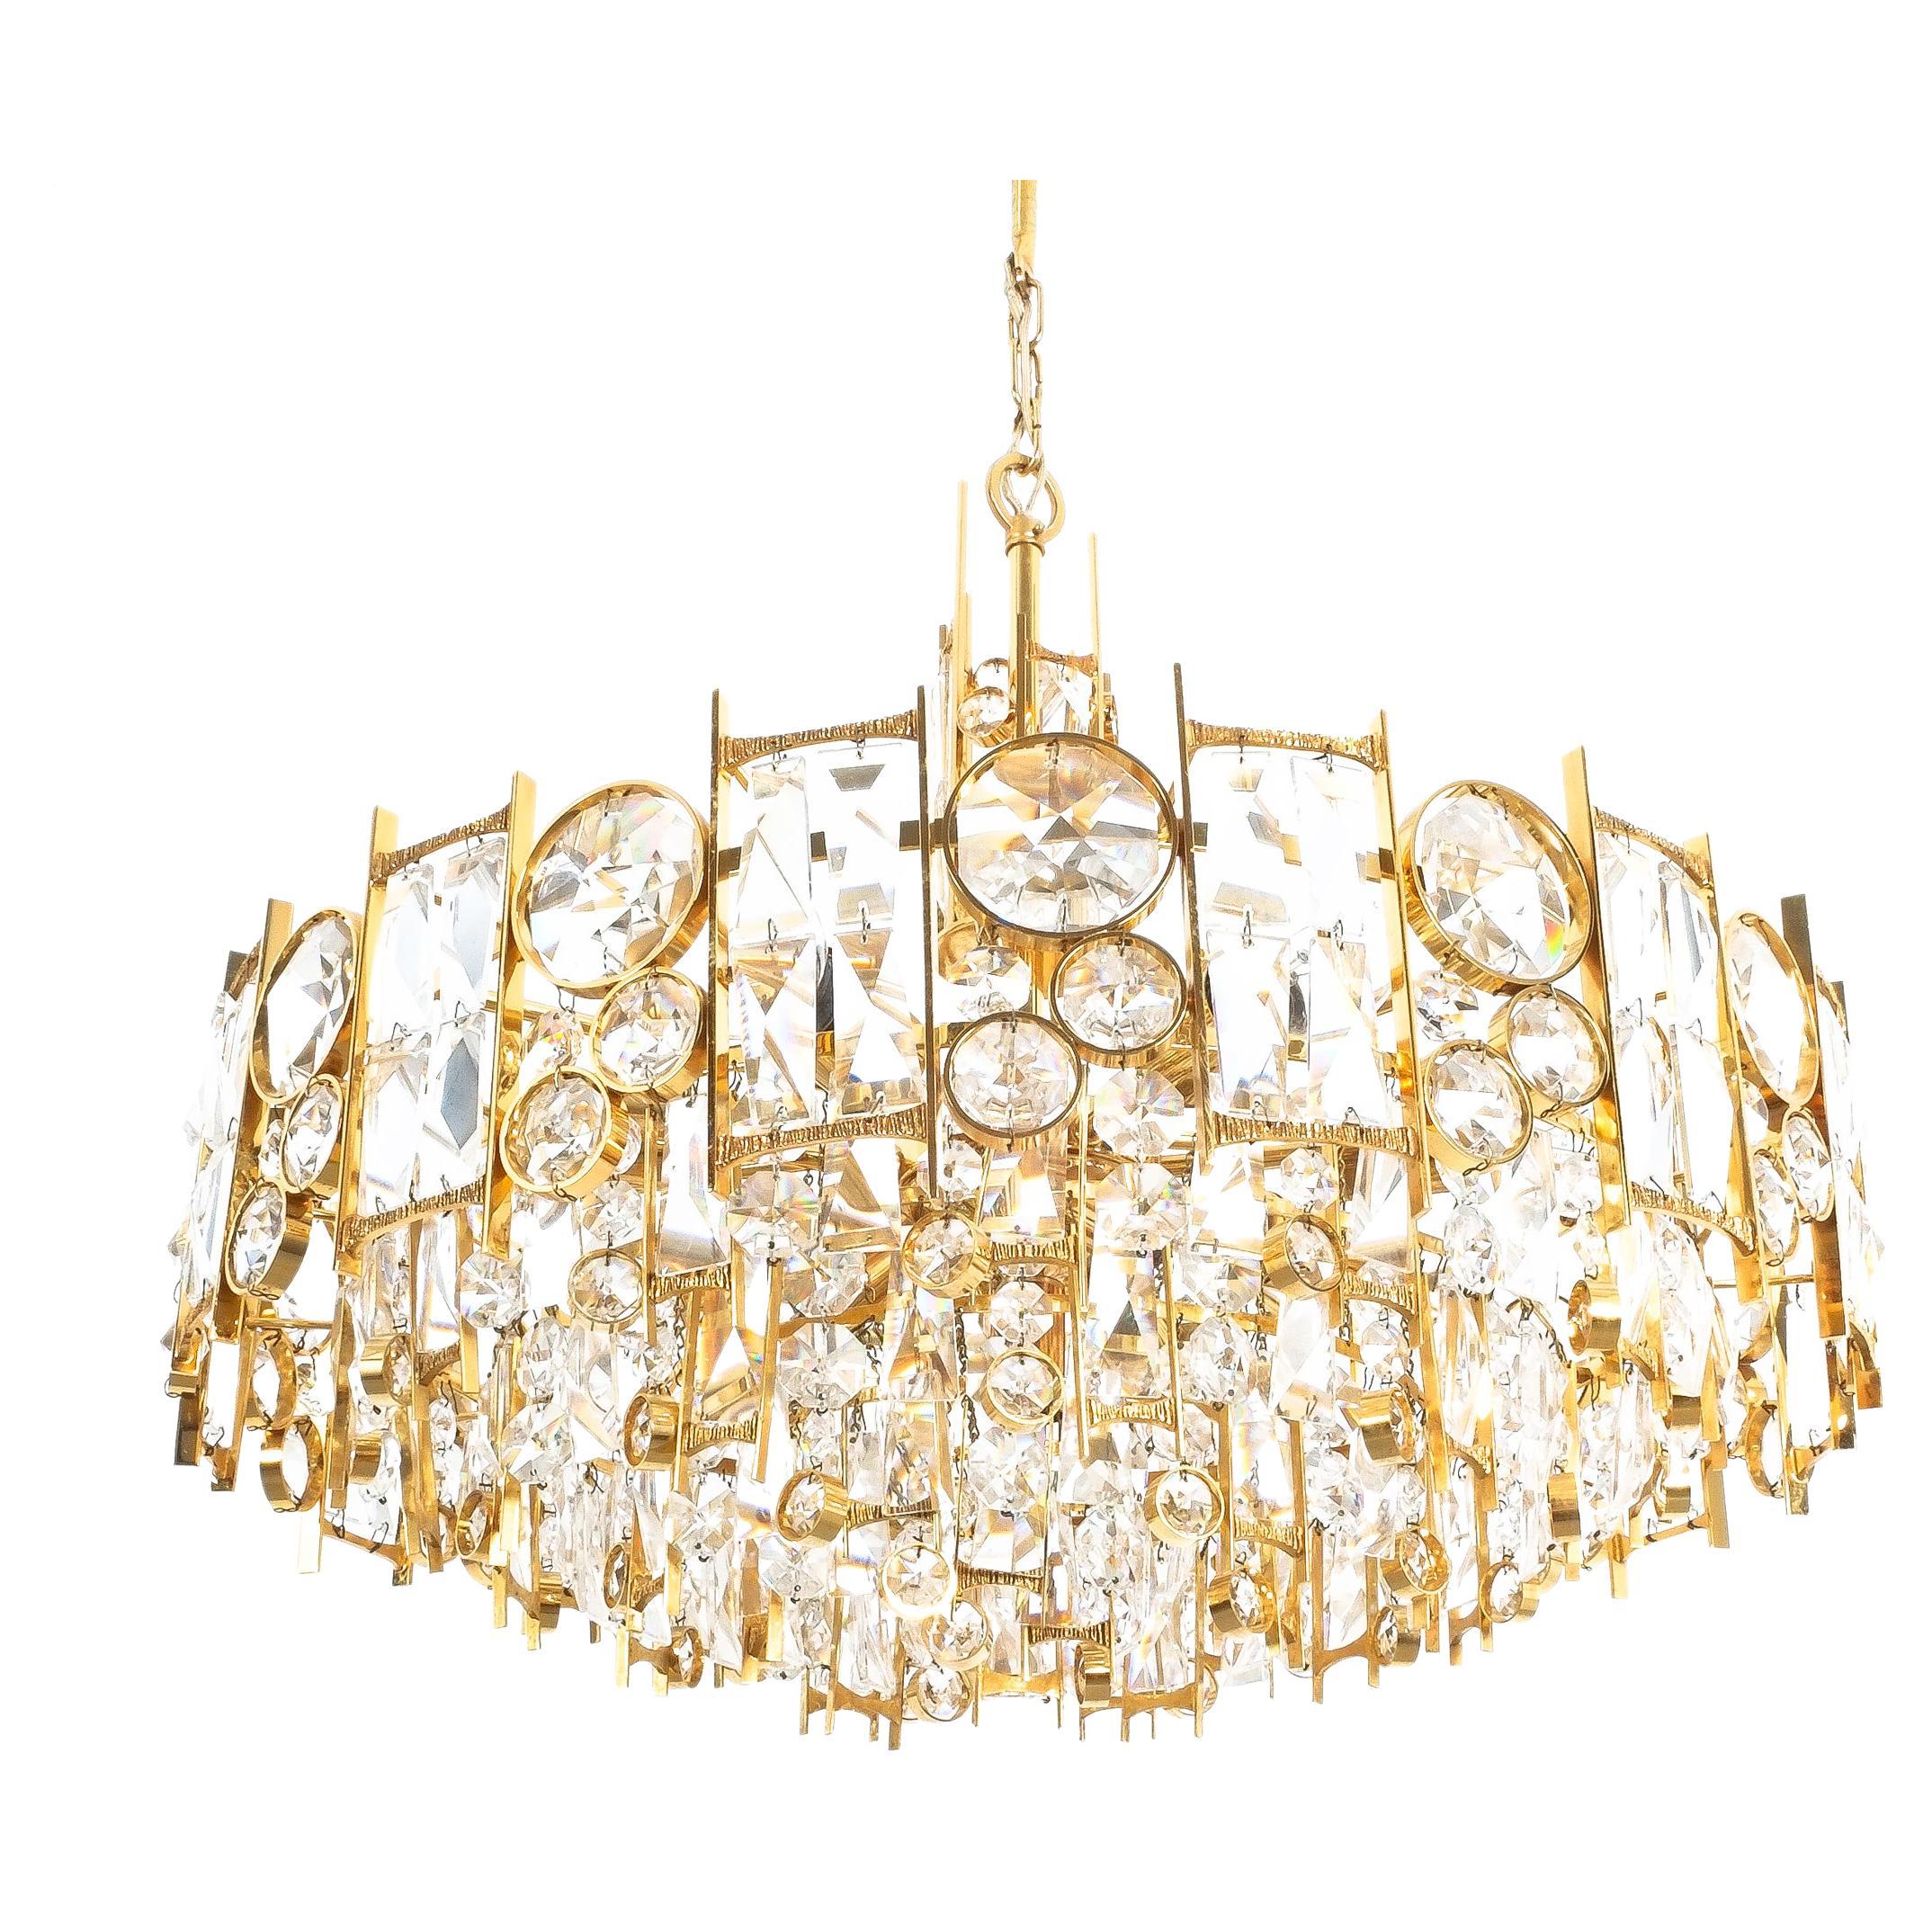 Palwa Gold Brass Crystal Glass Lamp Chandelier, Germany, 1960 For Sale